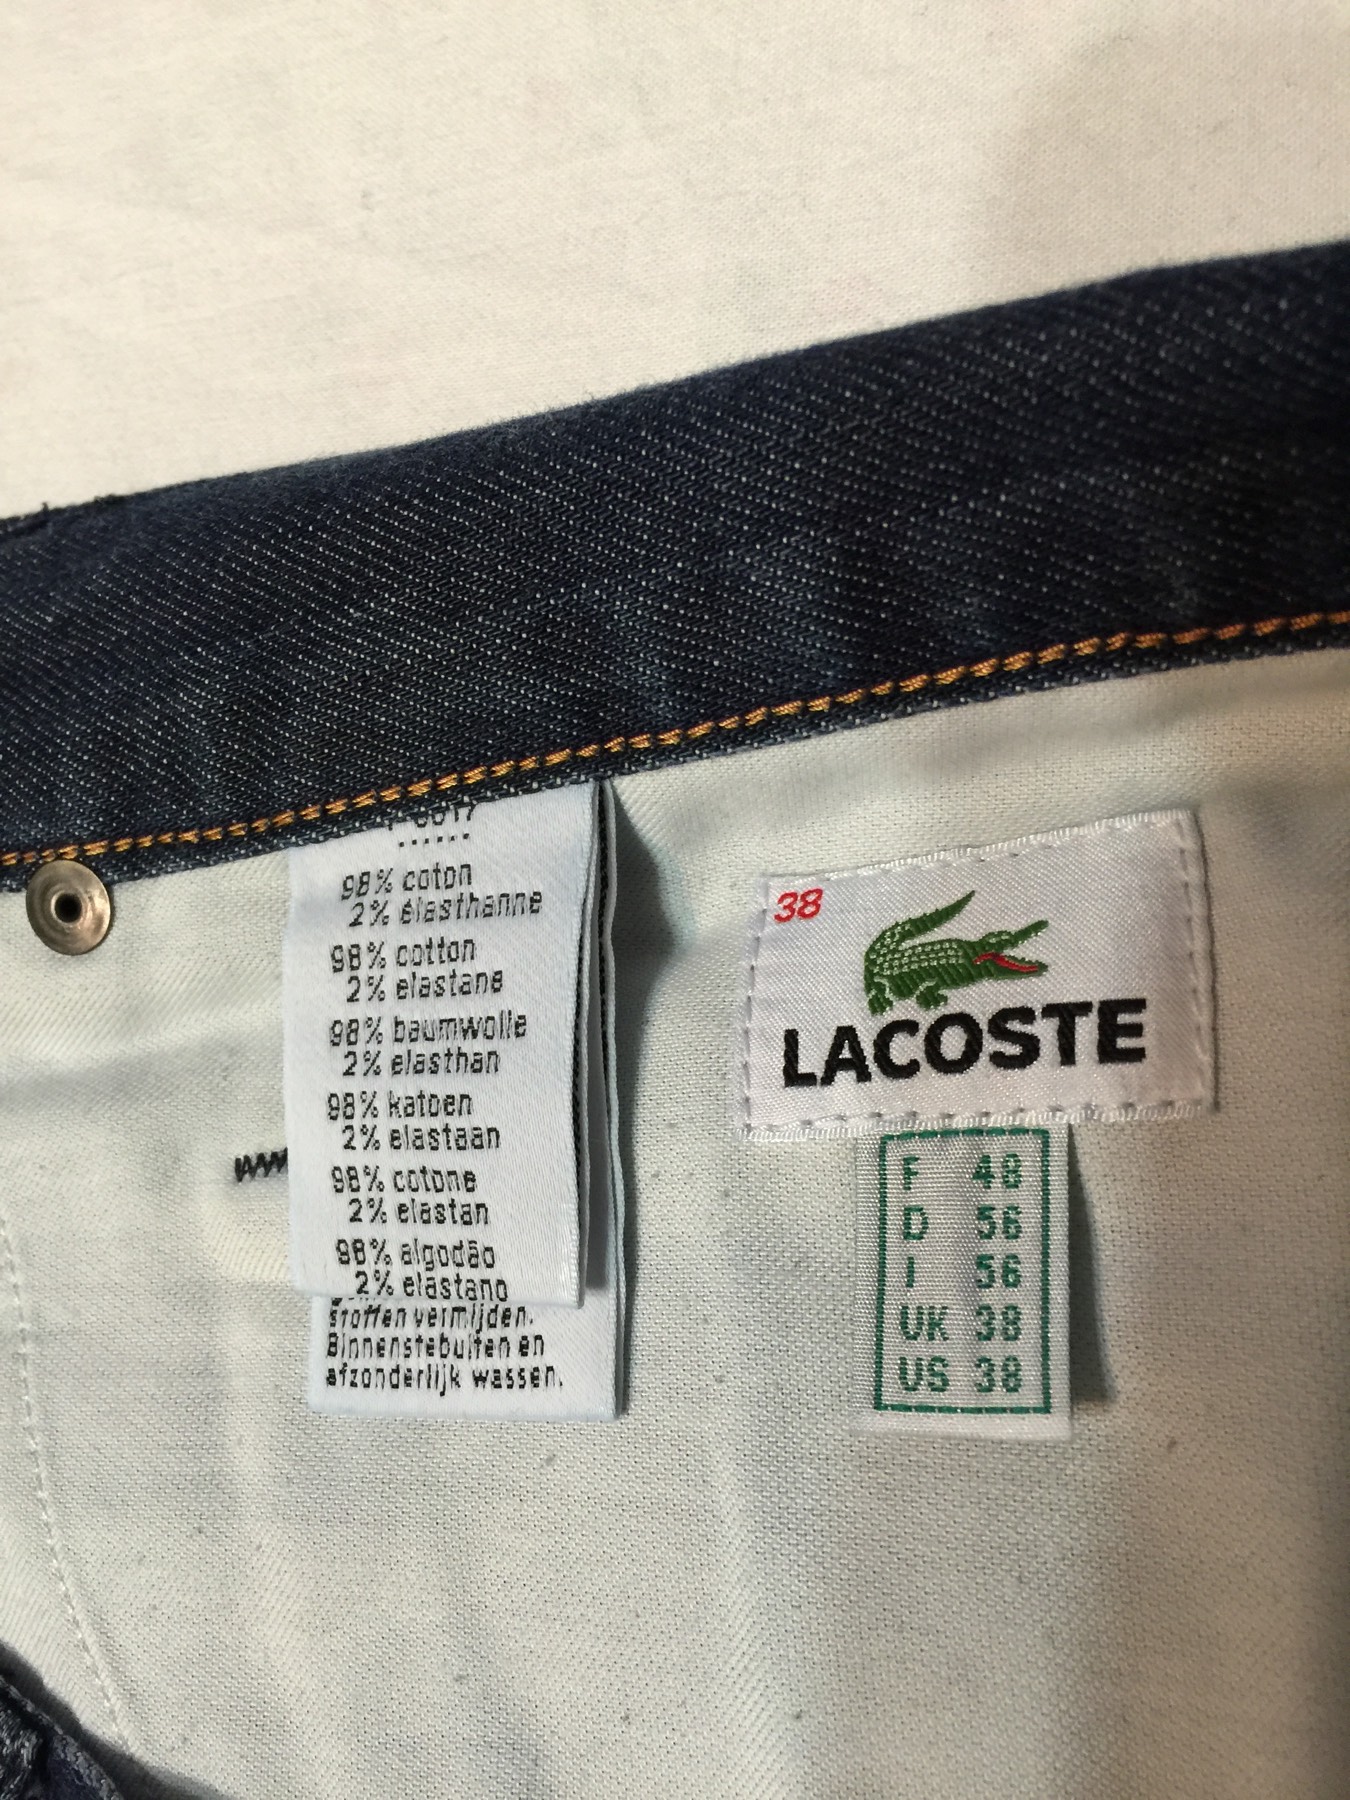 Can someone tell me if these Lacoste jeans are authentic? | Styleforum